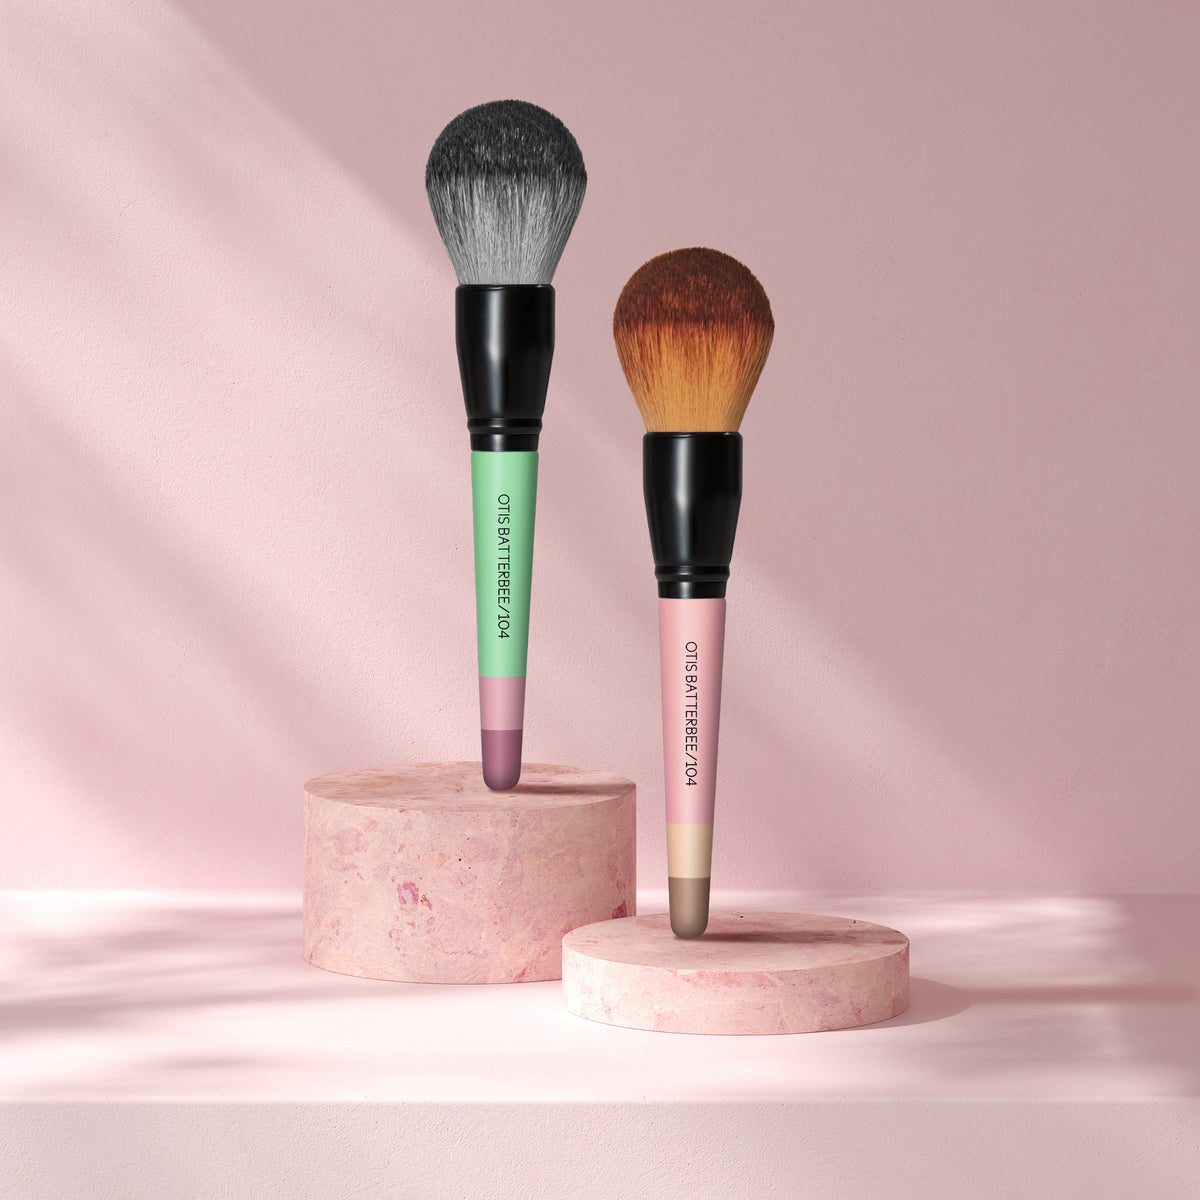 Discover Luxury: Otis Batterbee Ultimate Face Brush – Your Key to Flawless Beauty